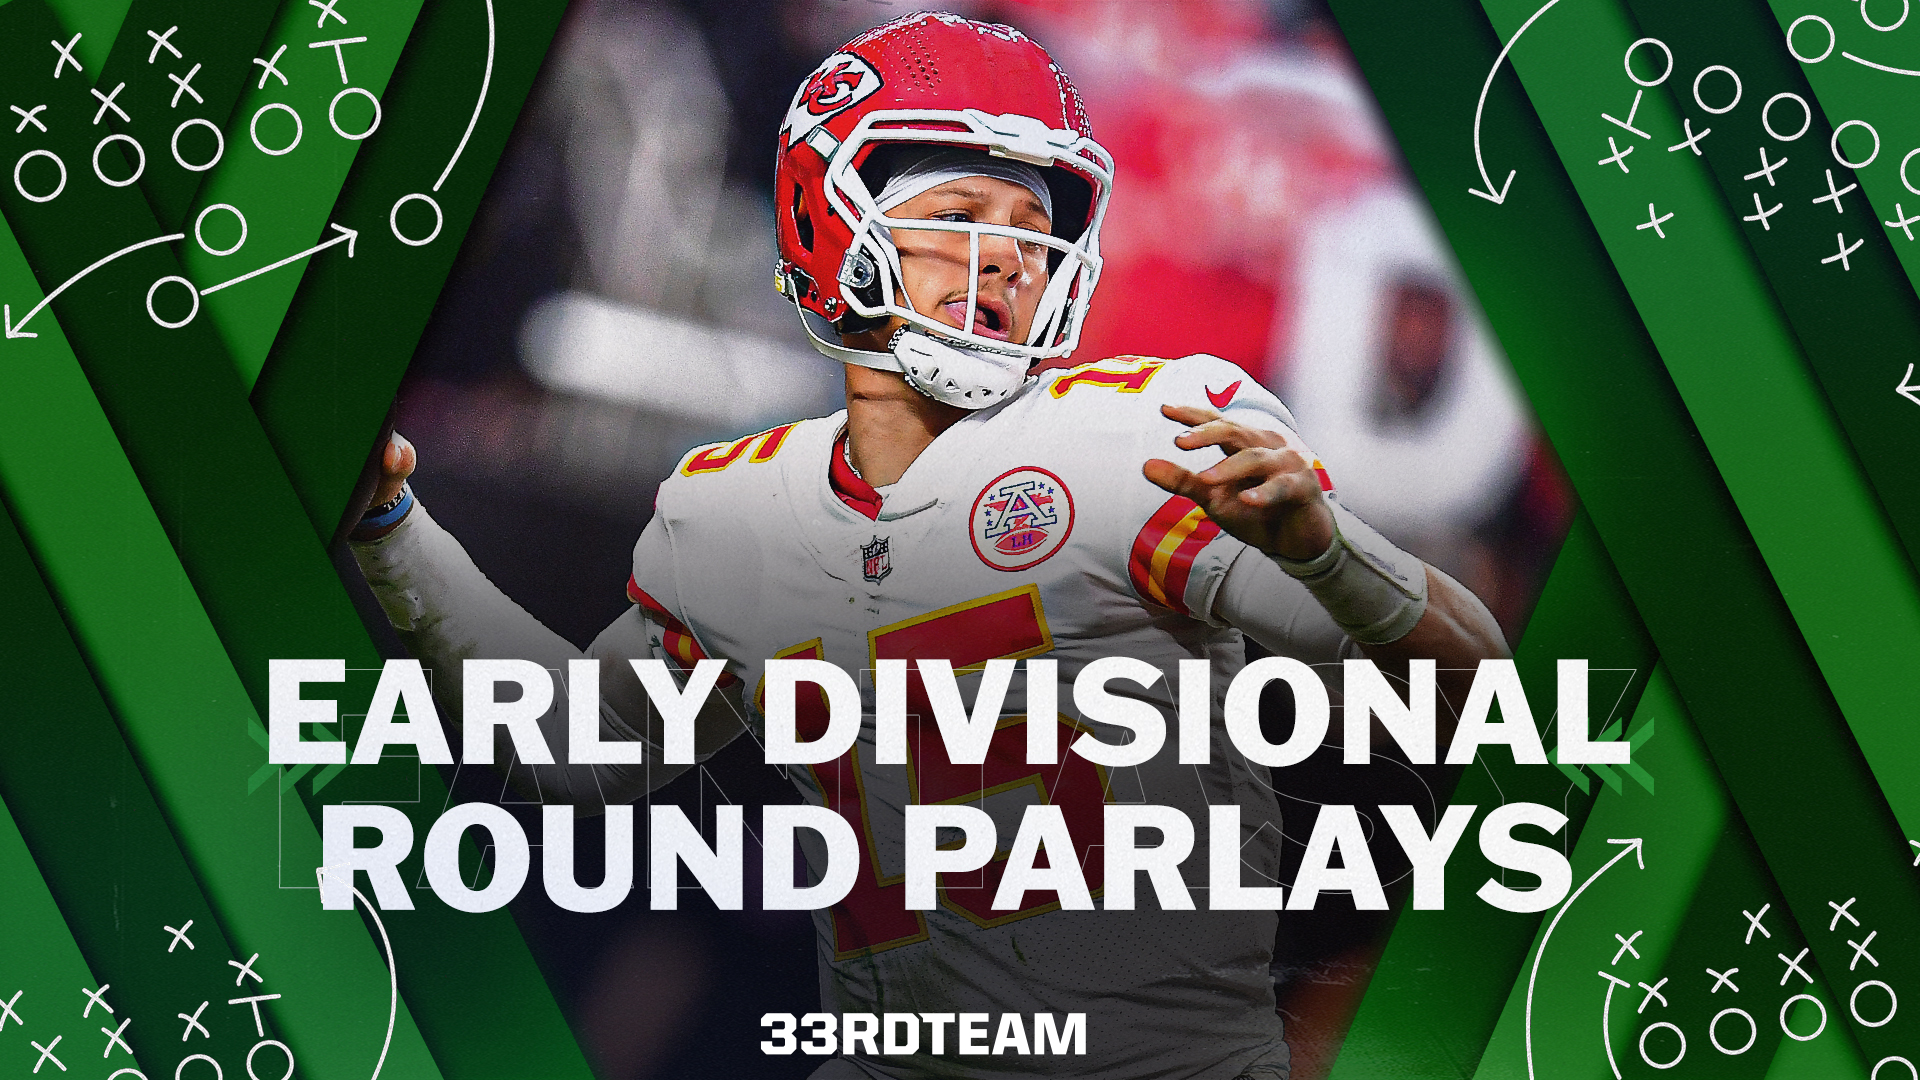 Divisional Round Parlays